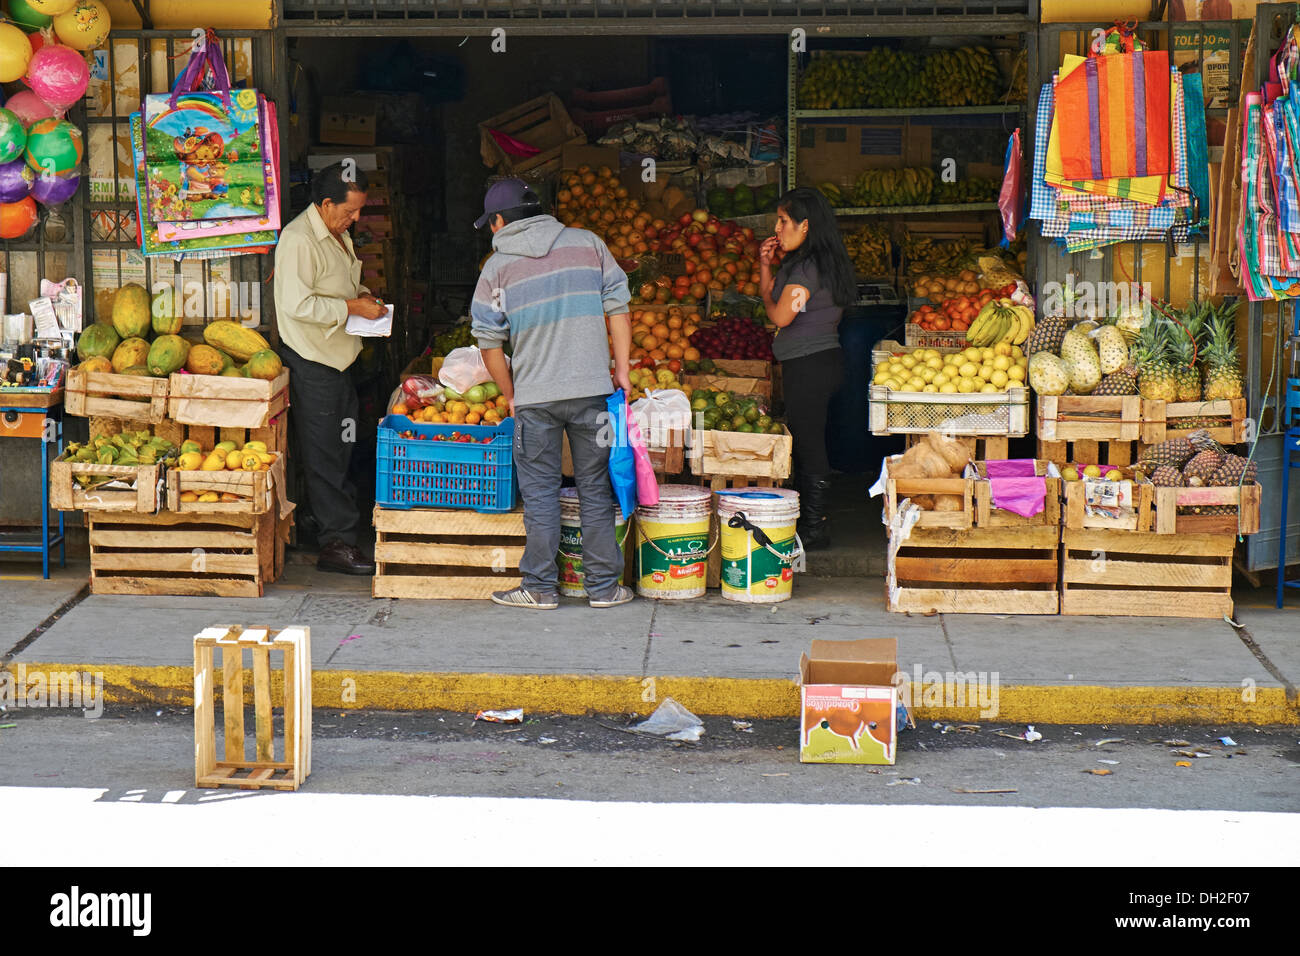 Fruit and vegetable trader, Huaraz In Peru, South America. Stock Photo